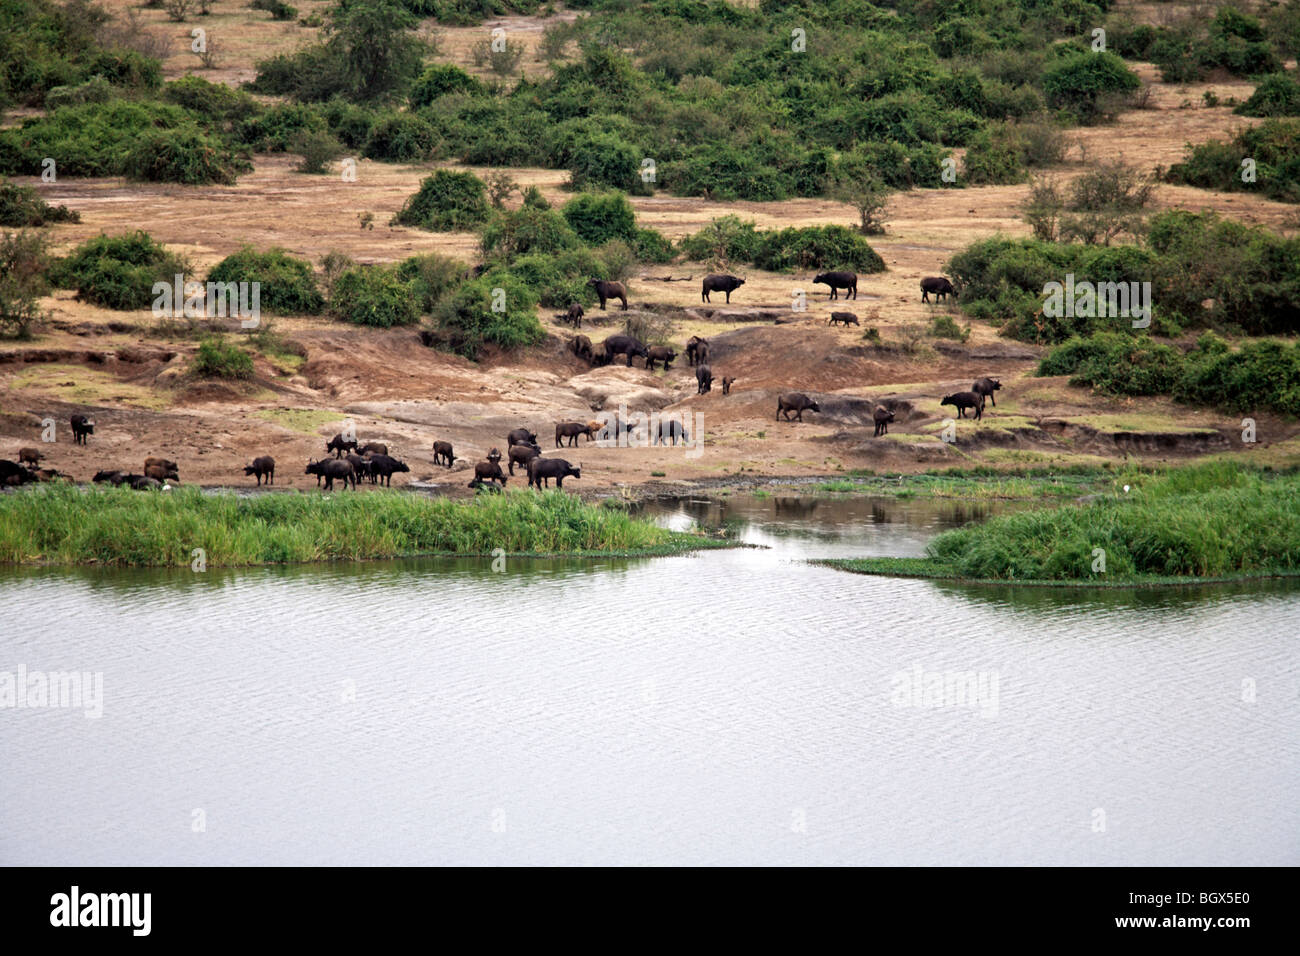 Watering place, Murchison Falls National park, Uganda, East Africa Stock Photo